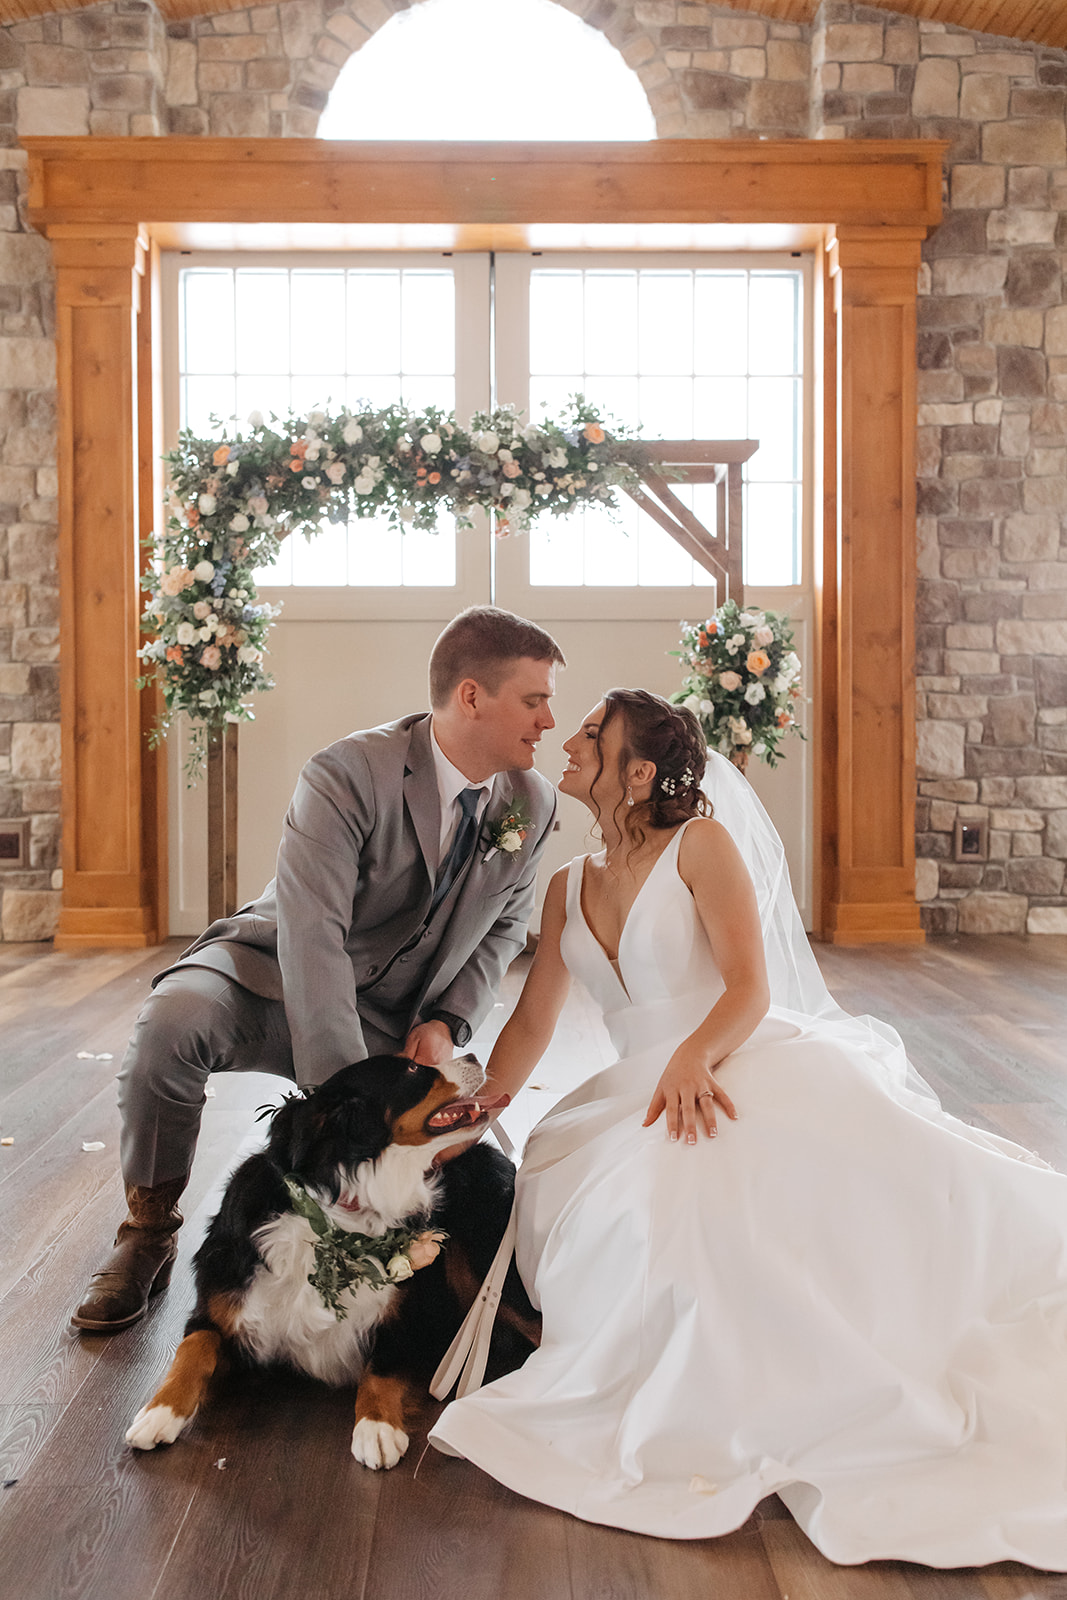 the bride and groom at the altar at Vignon Manor Farm with their dog